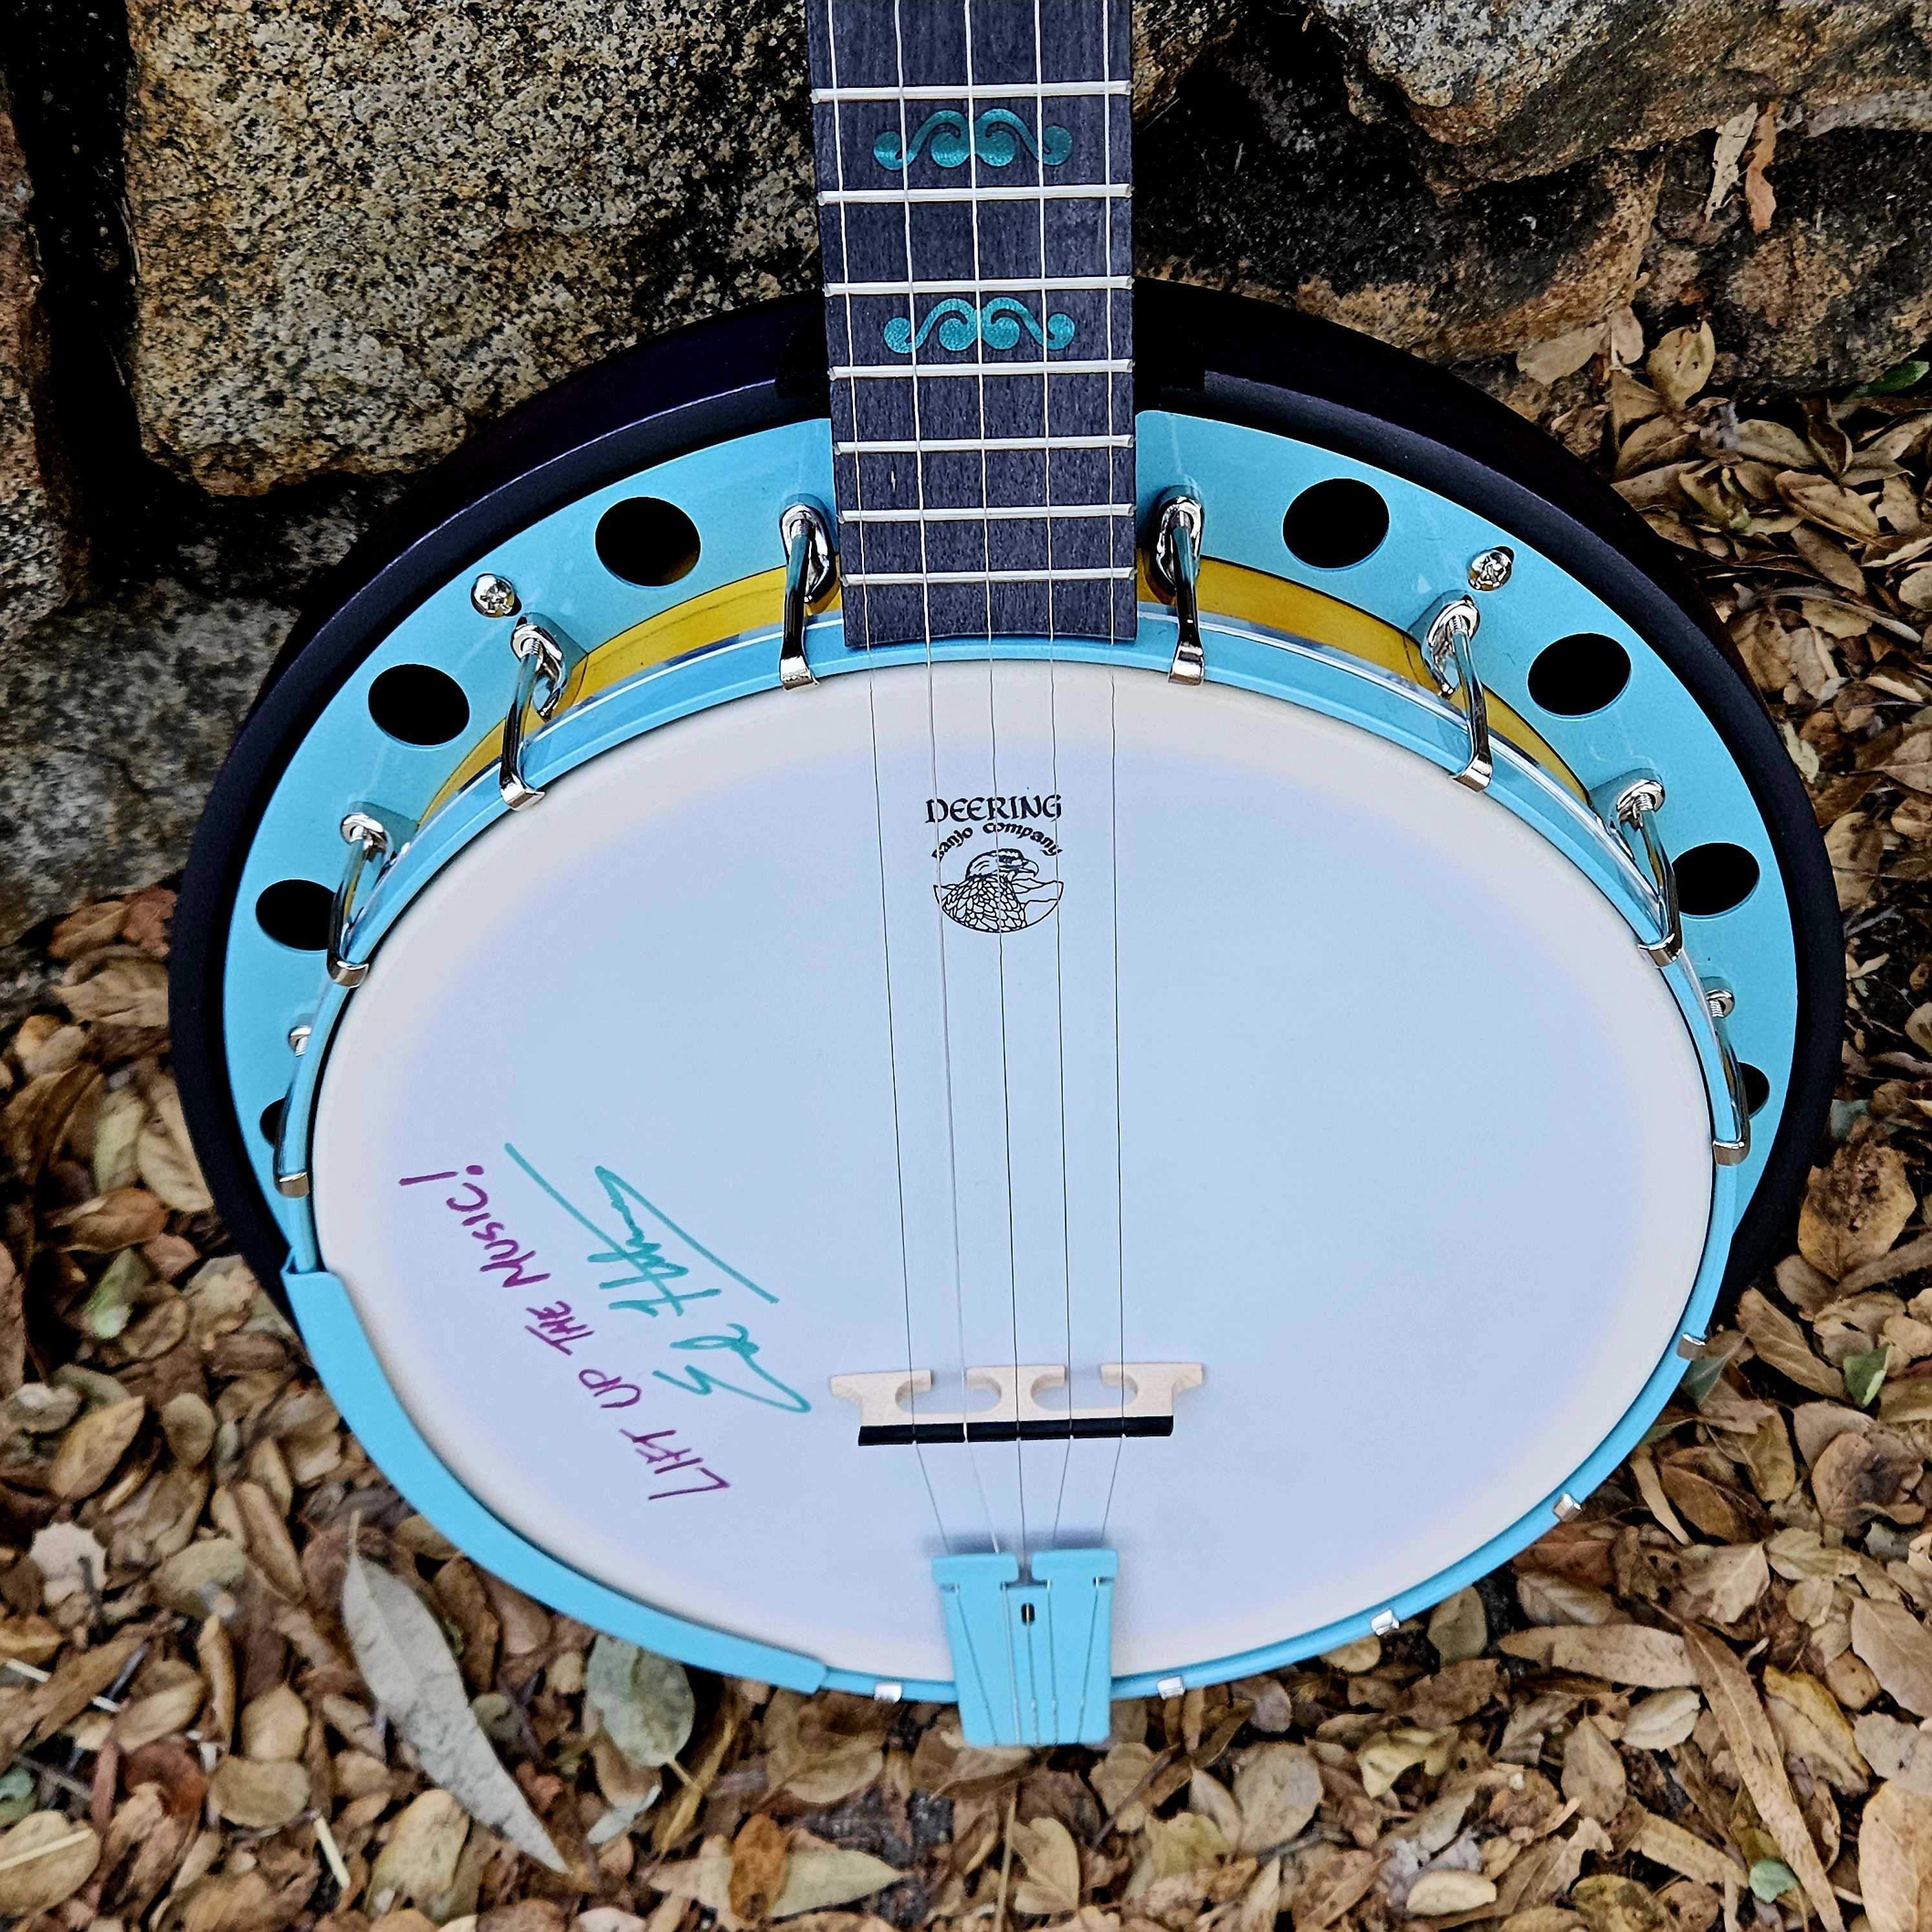 Ed Helms Giving Tuesday Charity Banjo!